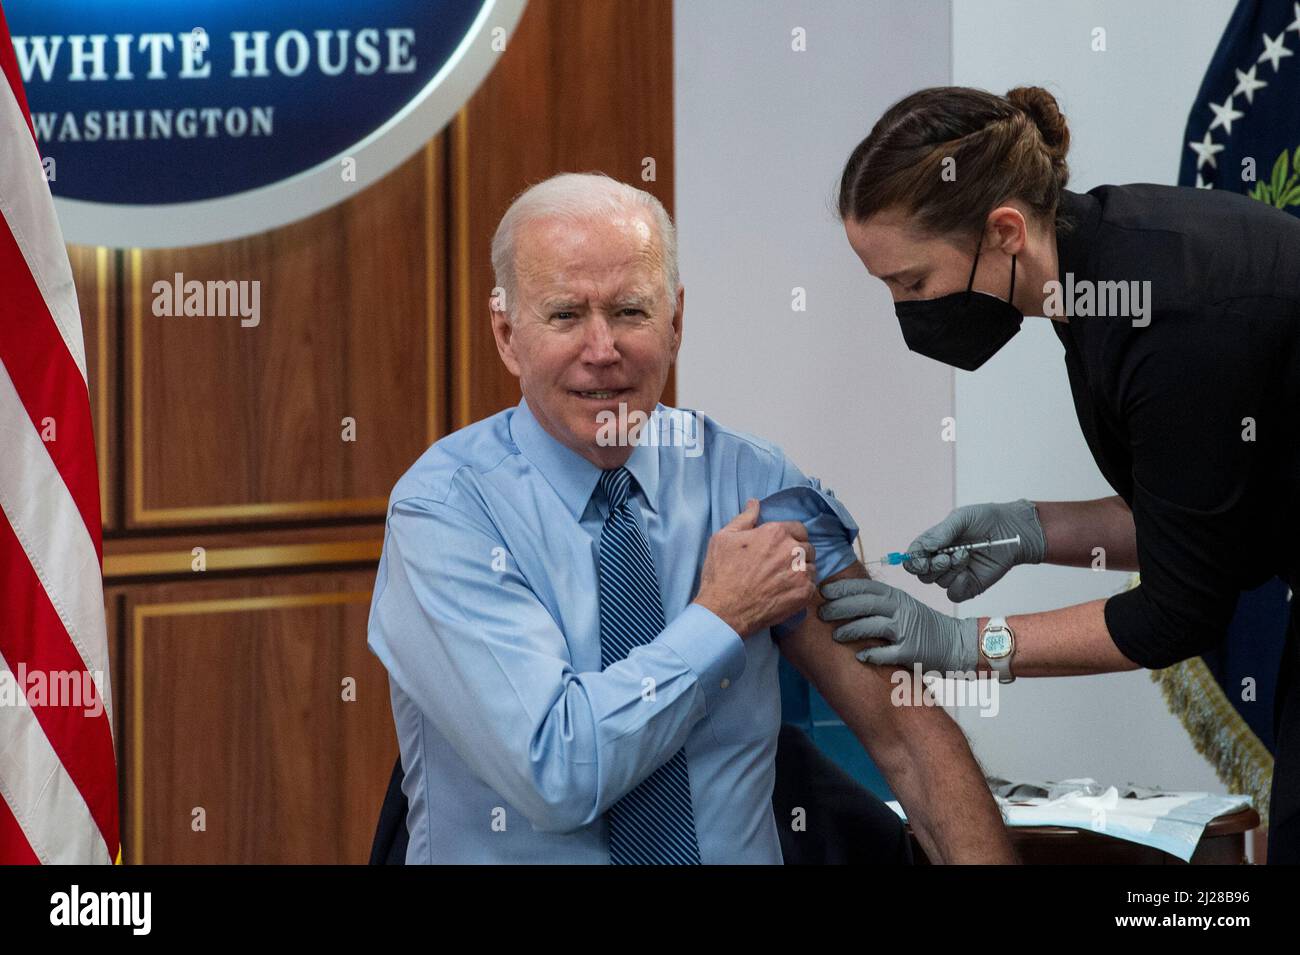 United States President Joe Biden receives his second COVID booster shot from Pfizer, by a member of the White House Medical Unit, following his remarks on the status of the countryâs fight against COVID-19, in the South Court Auditorium of the Eisenhower Executive Office Building on the White House campus in Washington, DC, Wednesday, March 30, 2022. Credit: Rod Lamkey/Pool via CNP Stock Photo